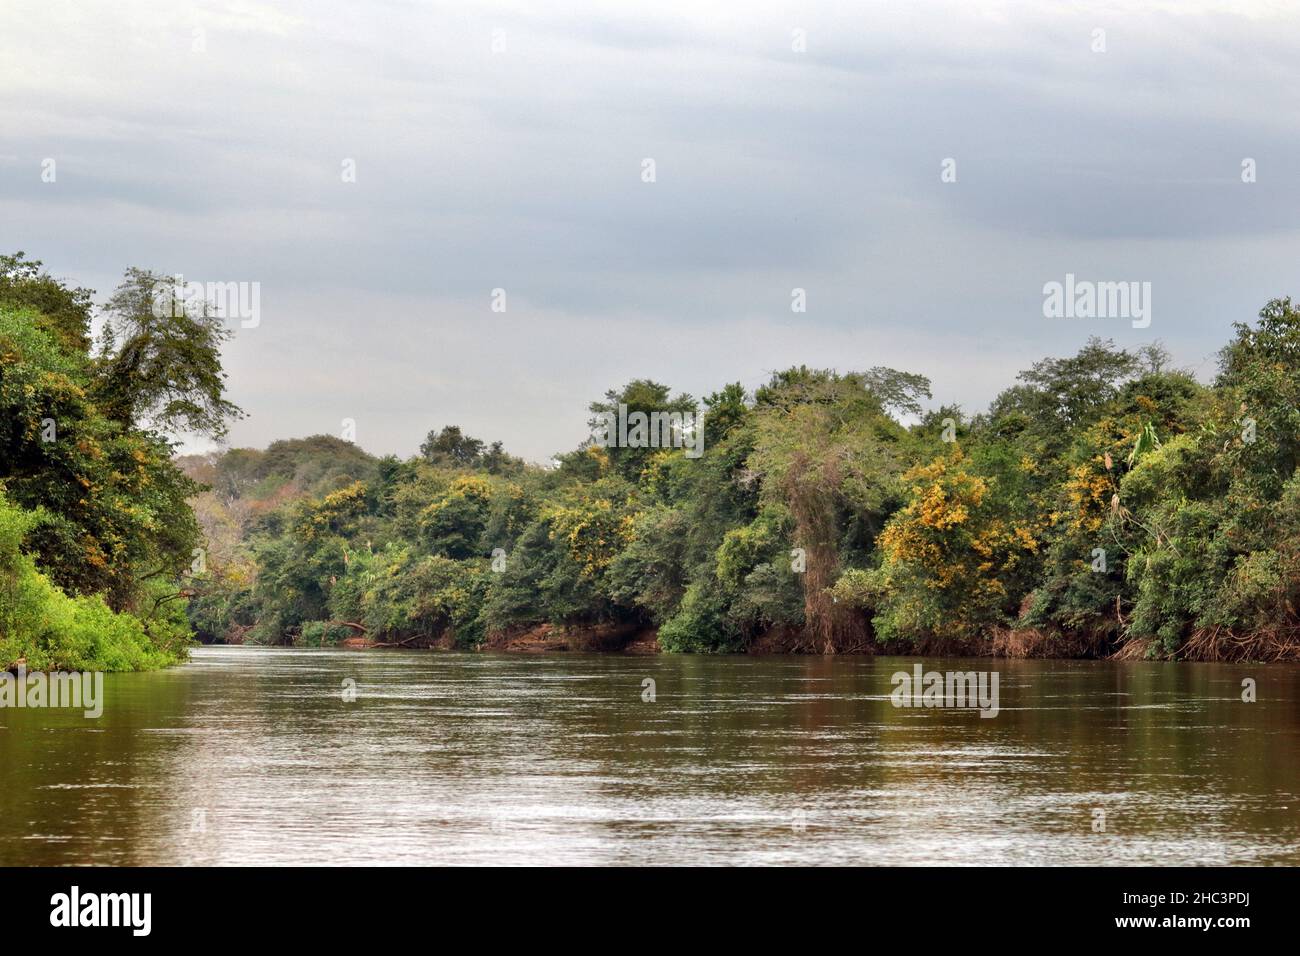 Gallery forest in the Pantanal Stock Photo